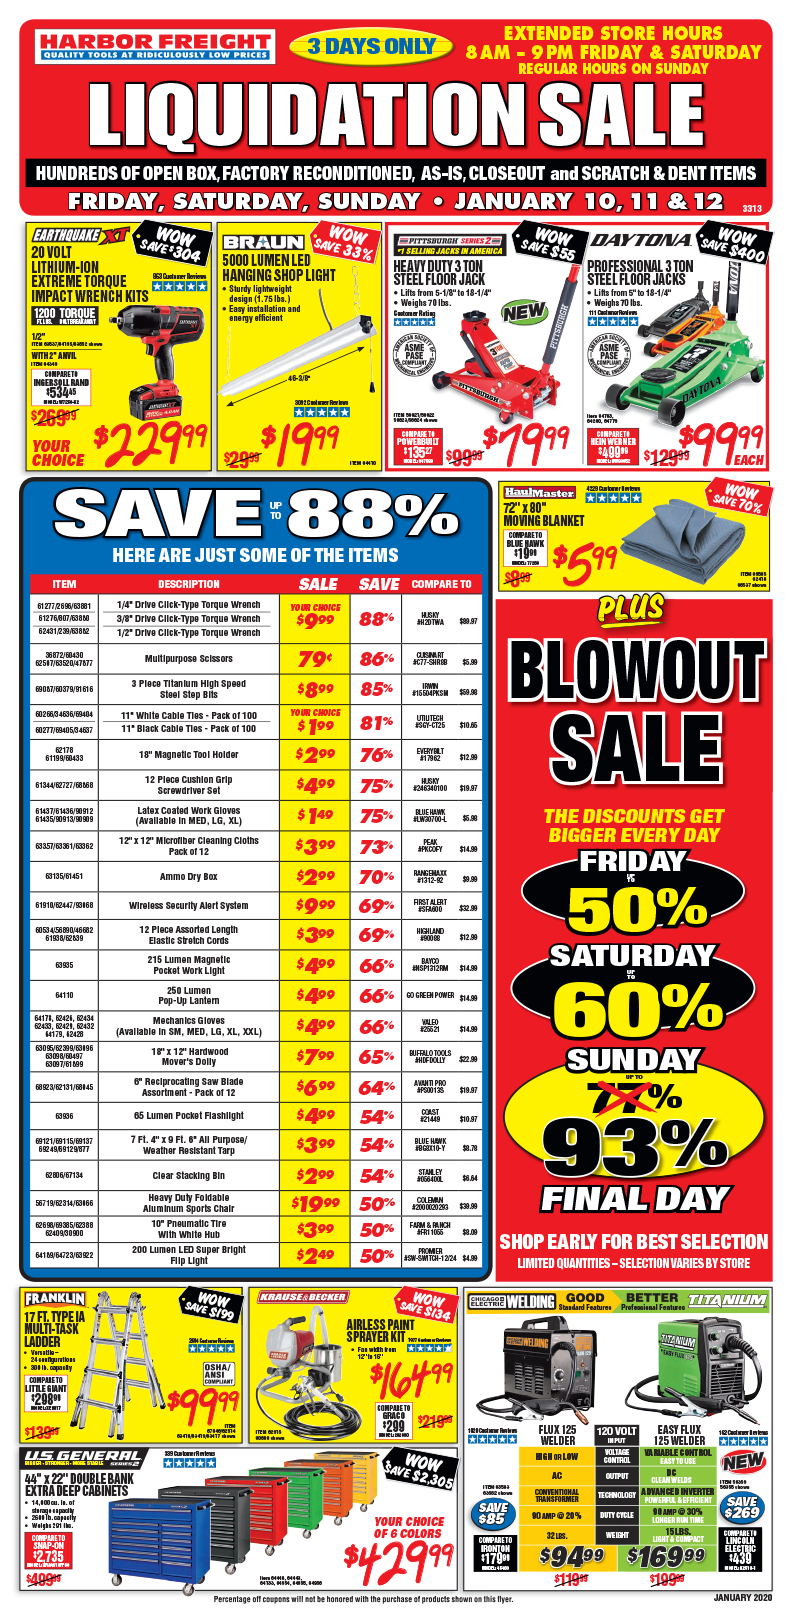 January Parking Lot Sale! – Harbor Freight Coupons